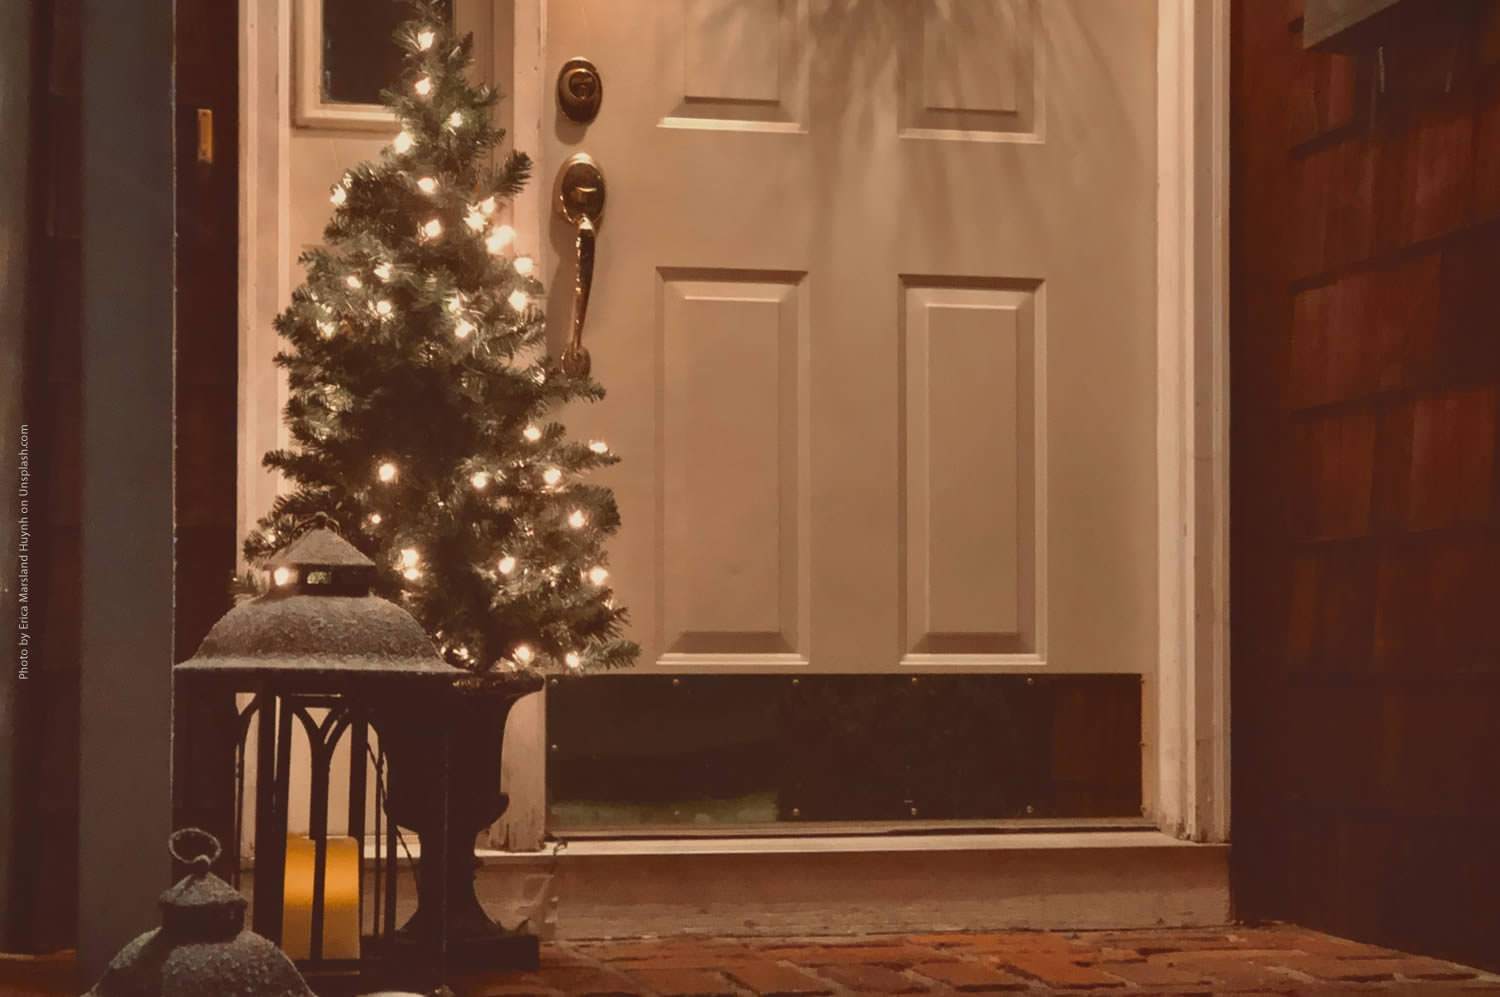 YOUR 4 WALLS: Light Up the Night with Holiday Decor